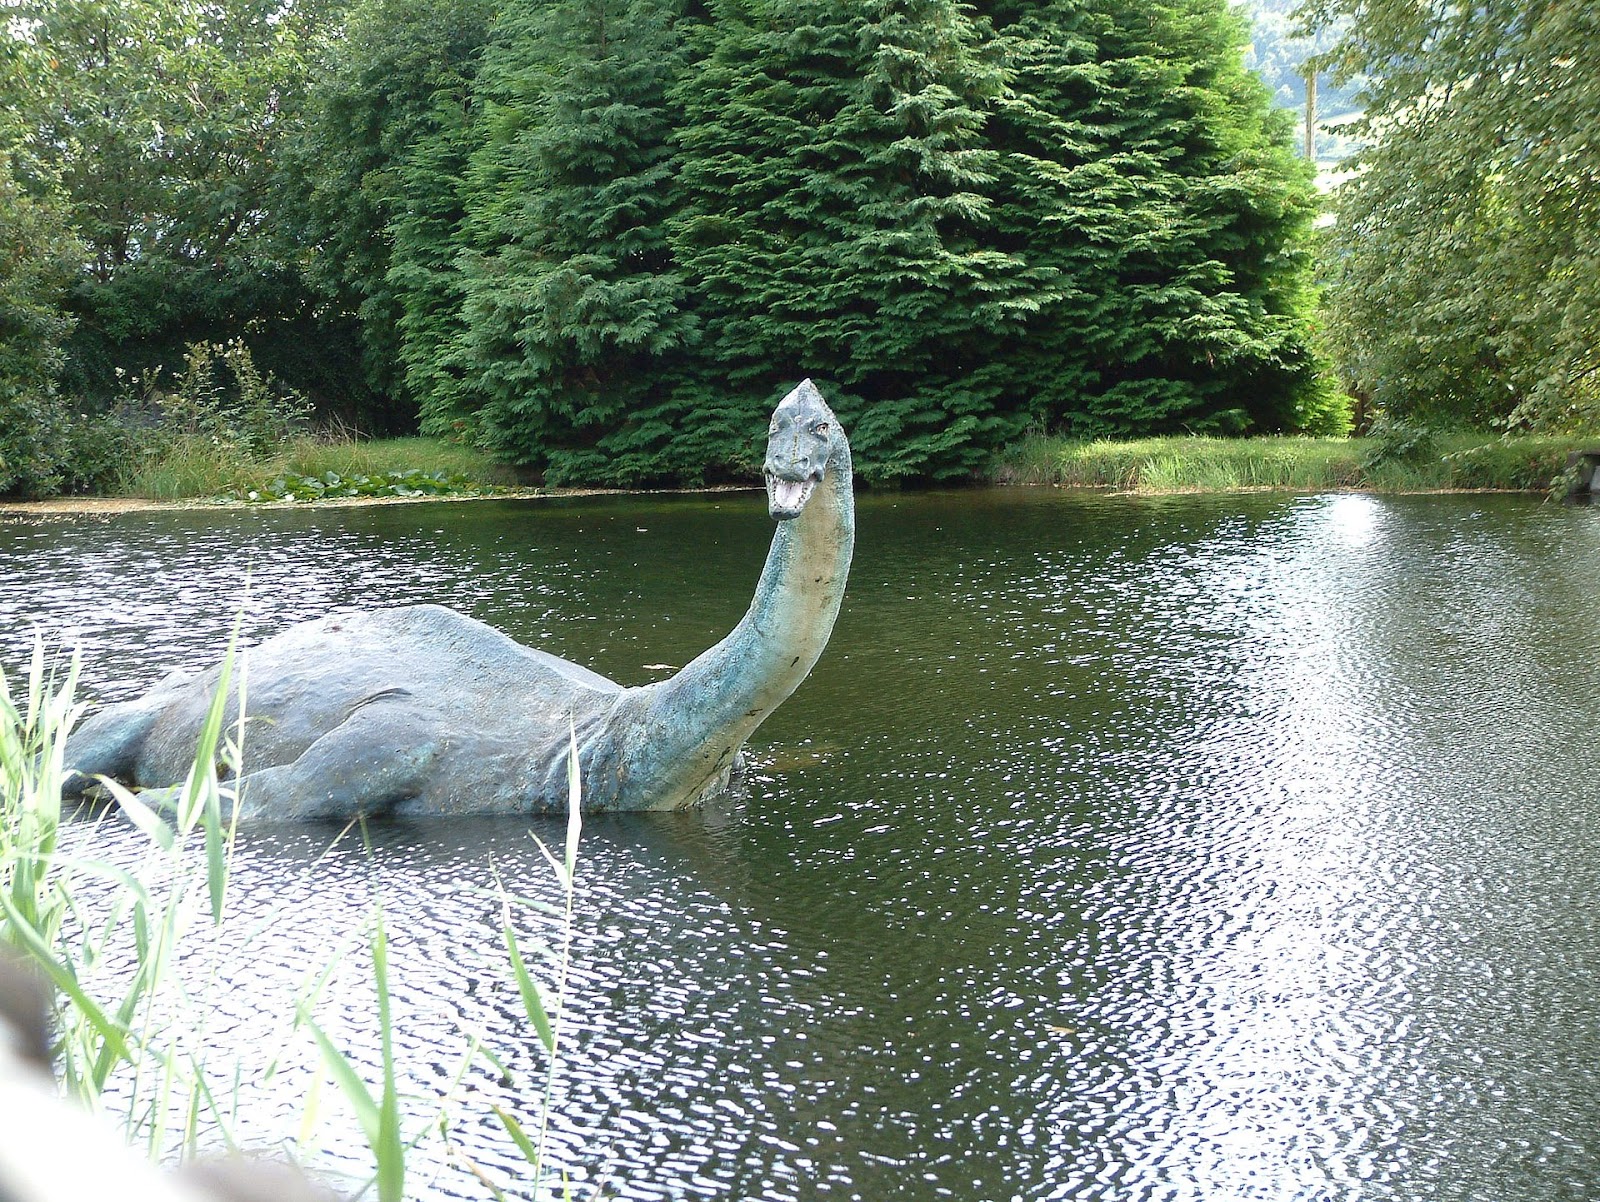 The Loch Ness monster’s role in war